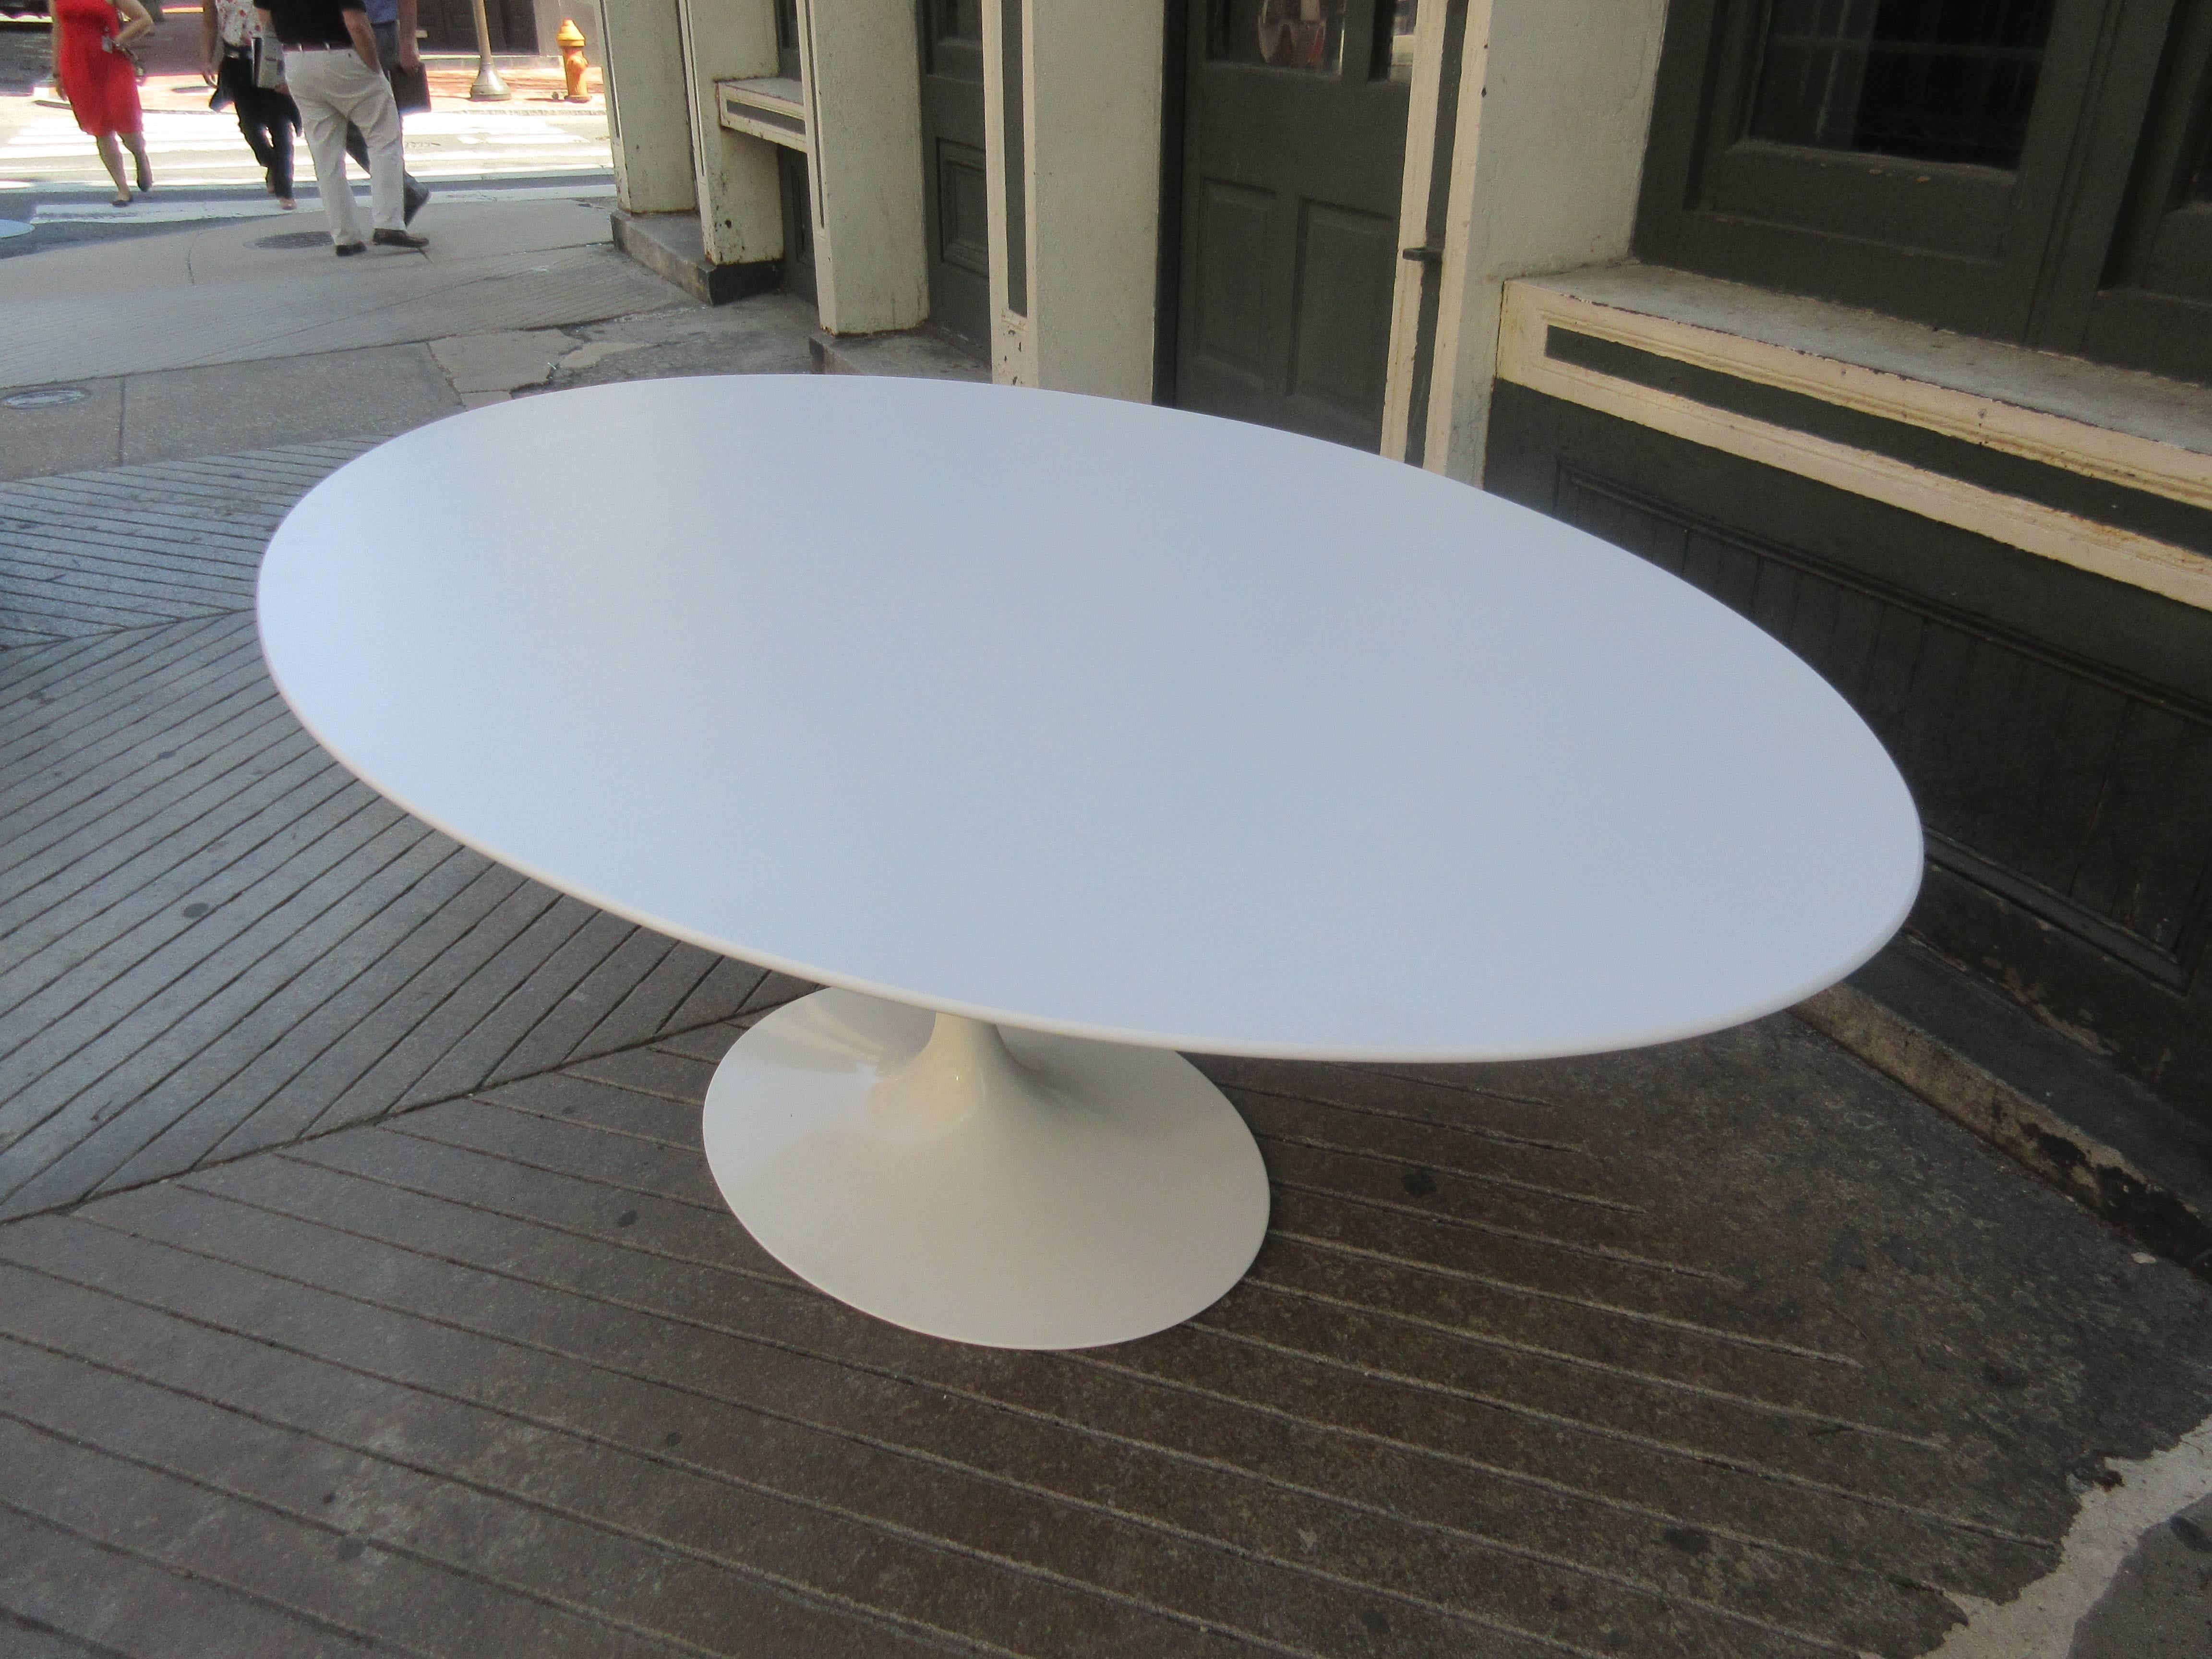 Eero Saarinen for Knoll 78 inch oval tulip table. Table retains all labels and is dated a 2013 production. Pure white laminate top and base in mint condition.